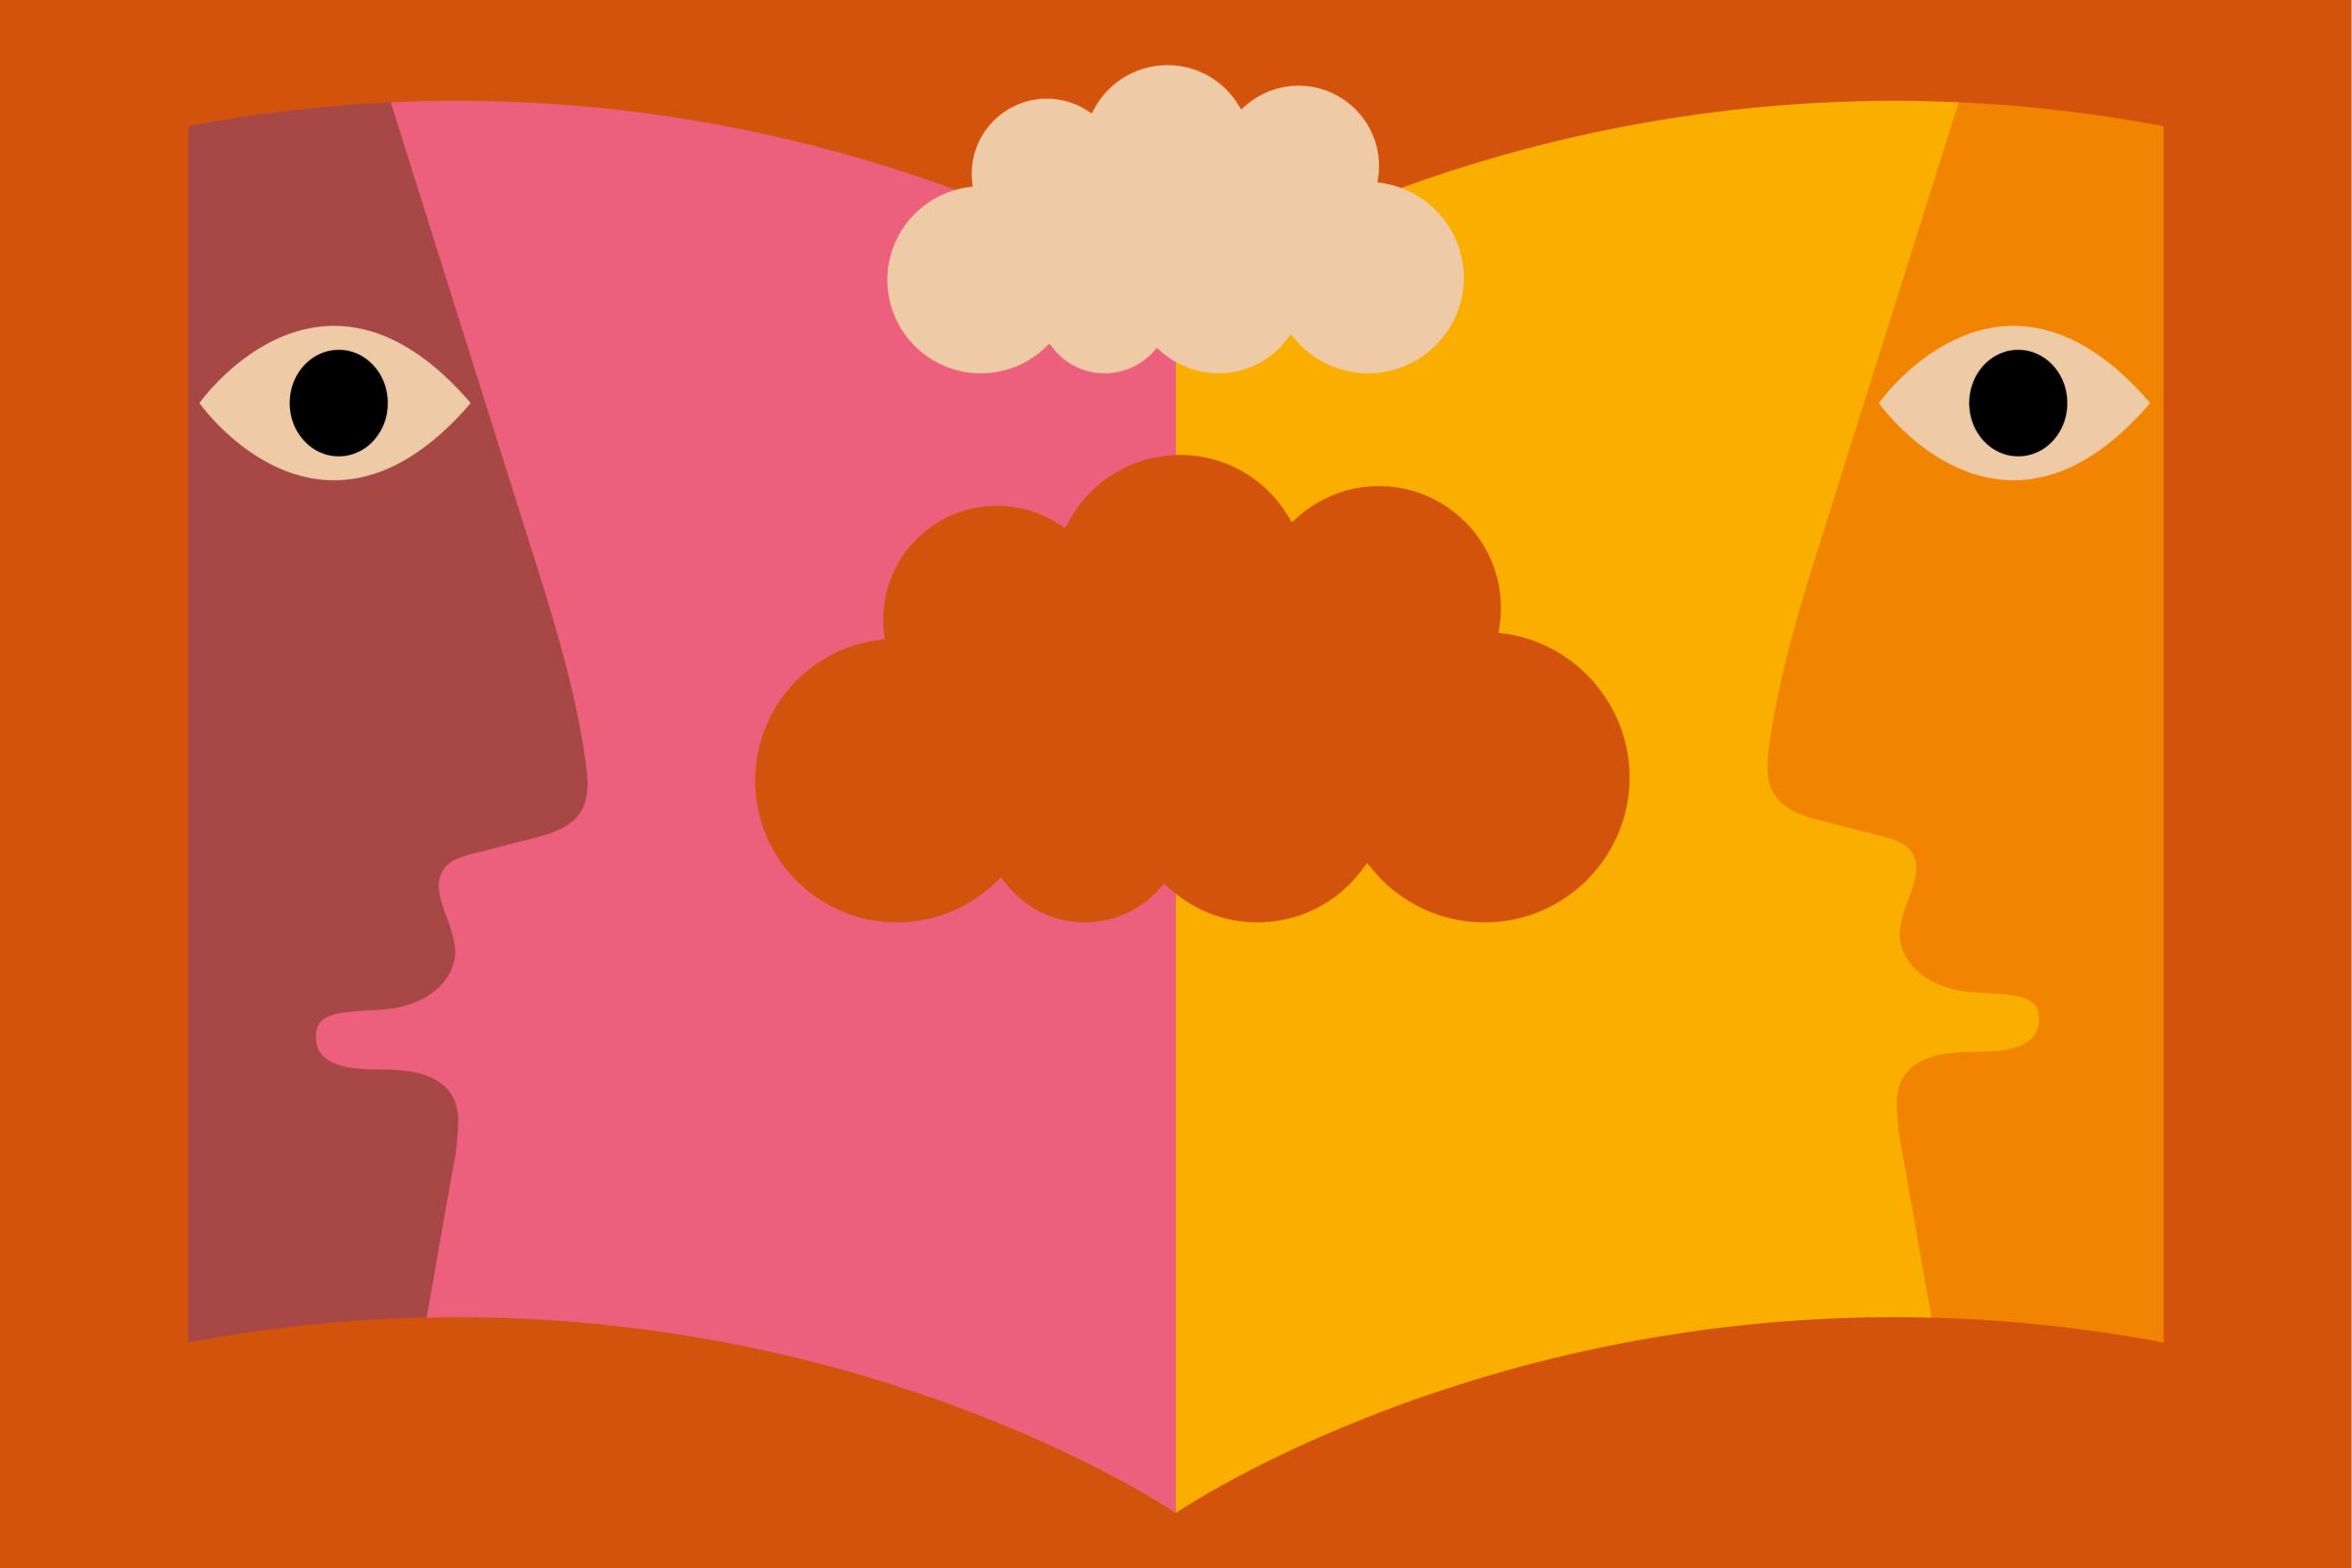 Illustration of two faces, an open book and clouds